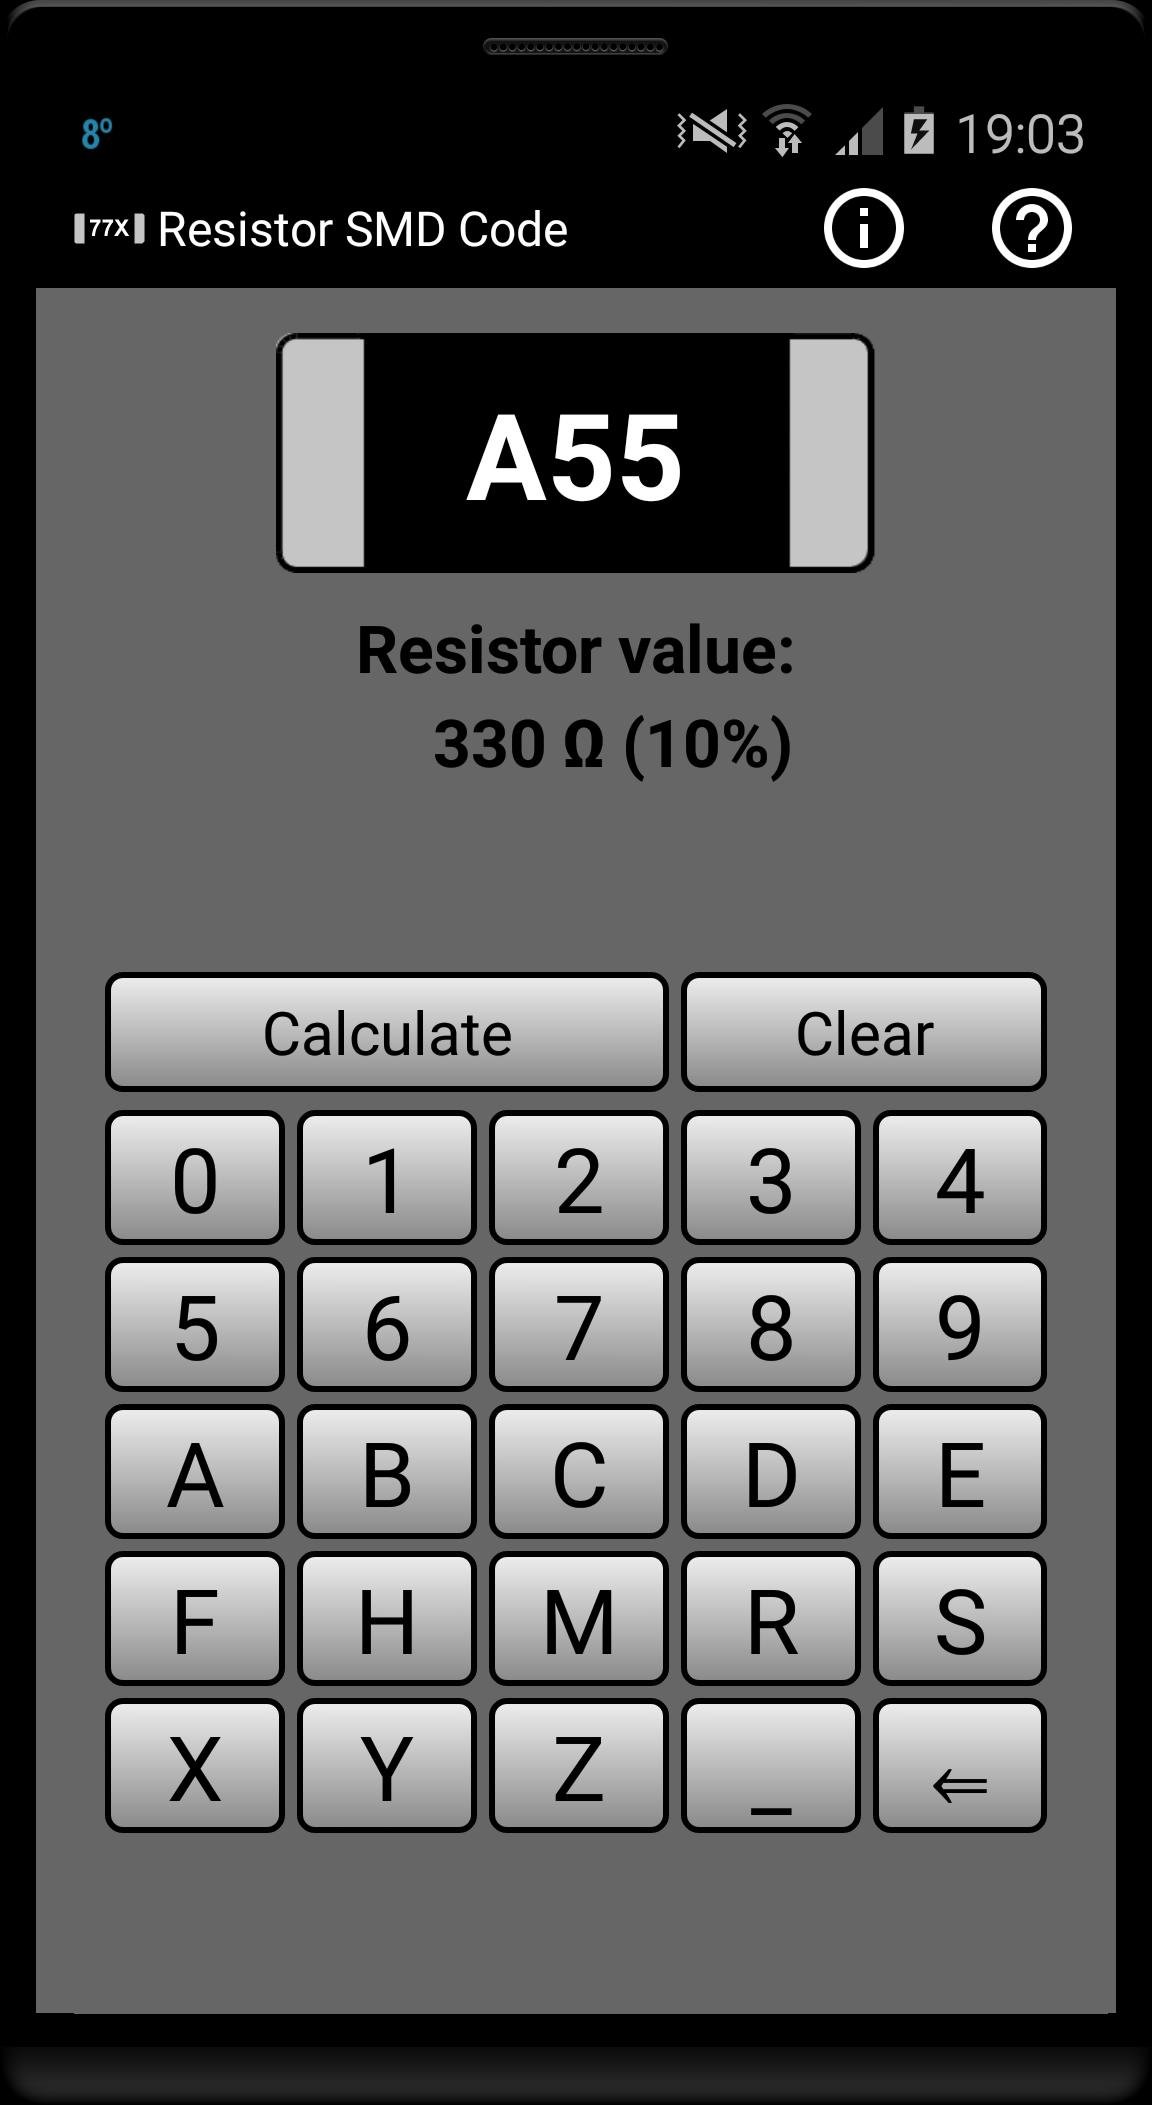 Free download resistance color code calculator 4 band